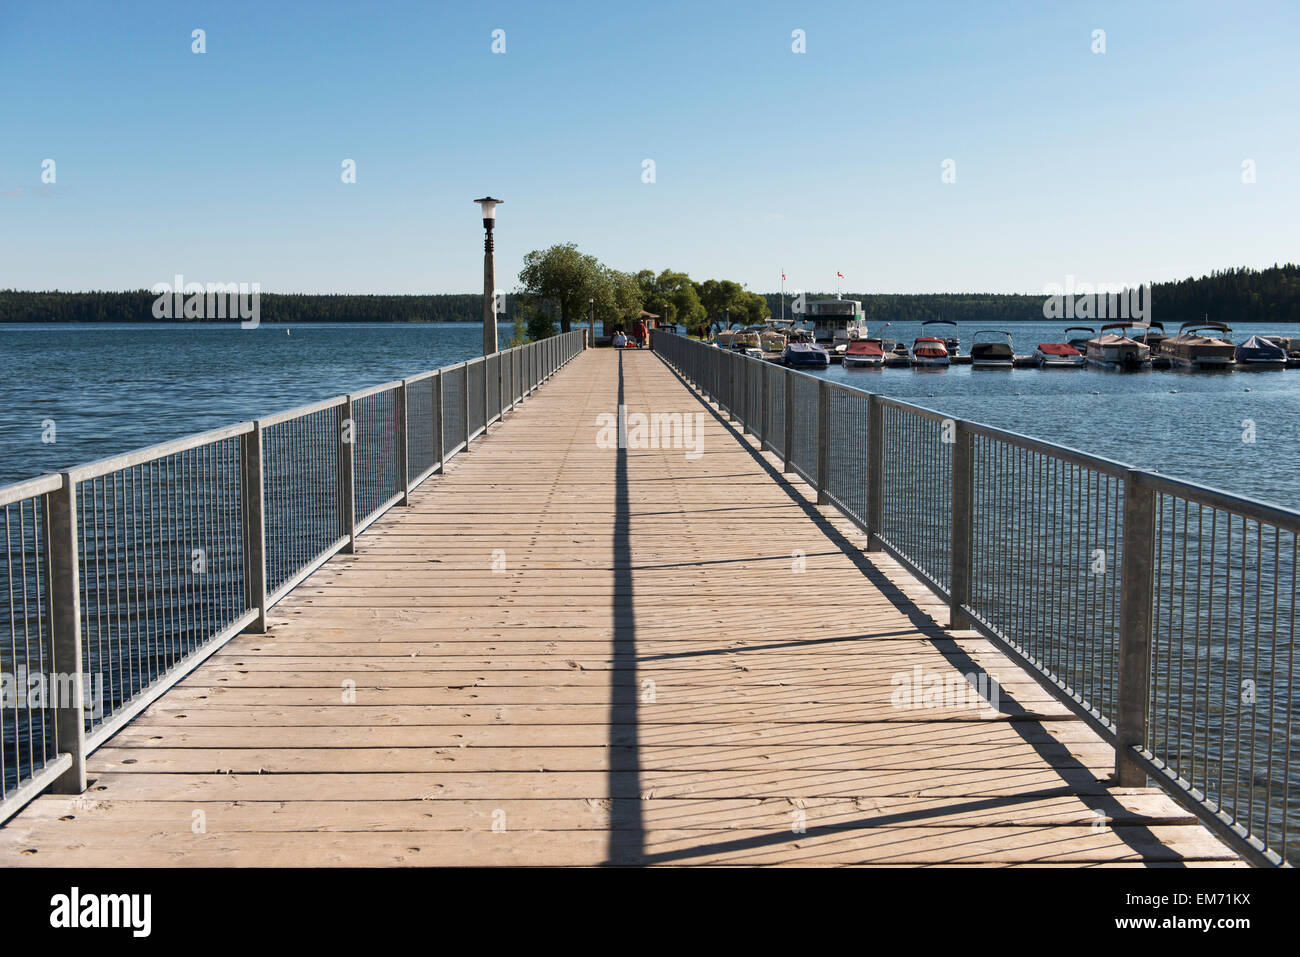 A wooden boardwalk leading out to the water and boats mooring in a harbour; Manitoba, Canada Stock Photo